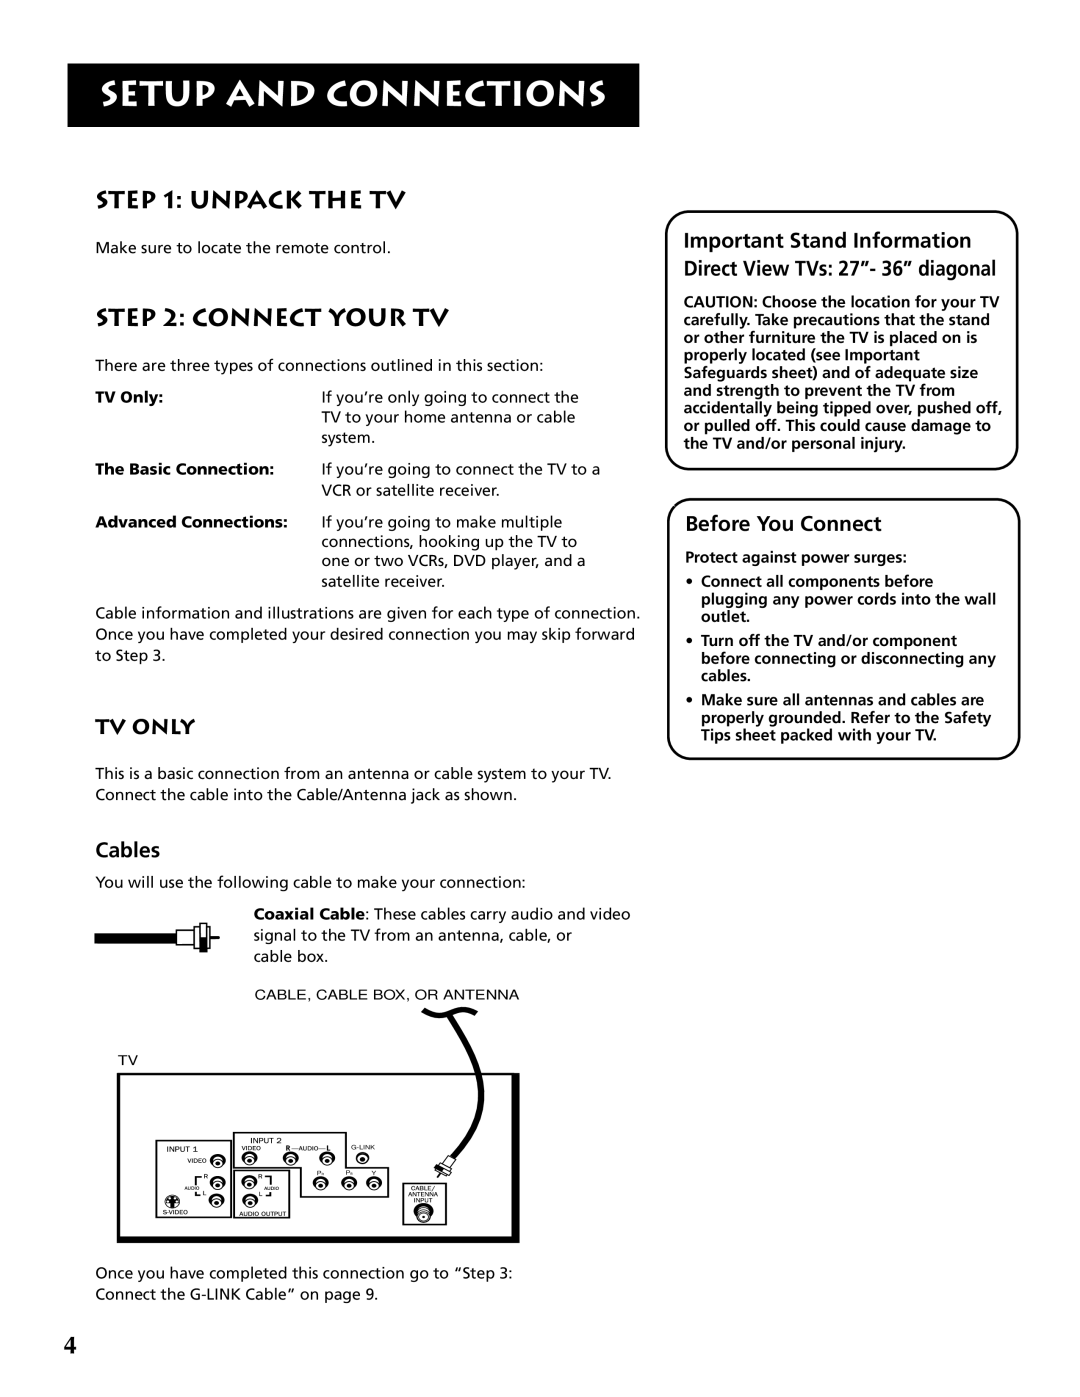 RCA F32691 manual Unpack The Tv, Connect Your Tv, Tv Only, Cables, Before You Connect, Setup And Connections, TV Only 